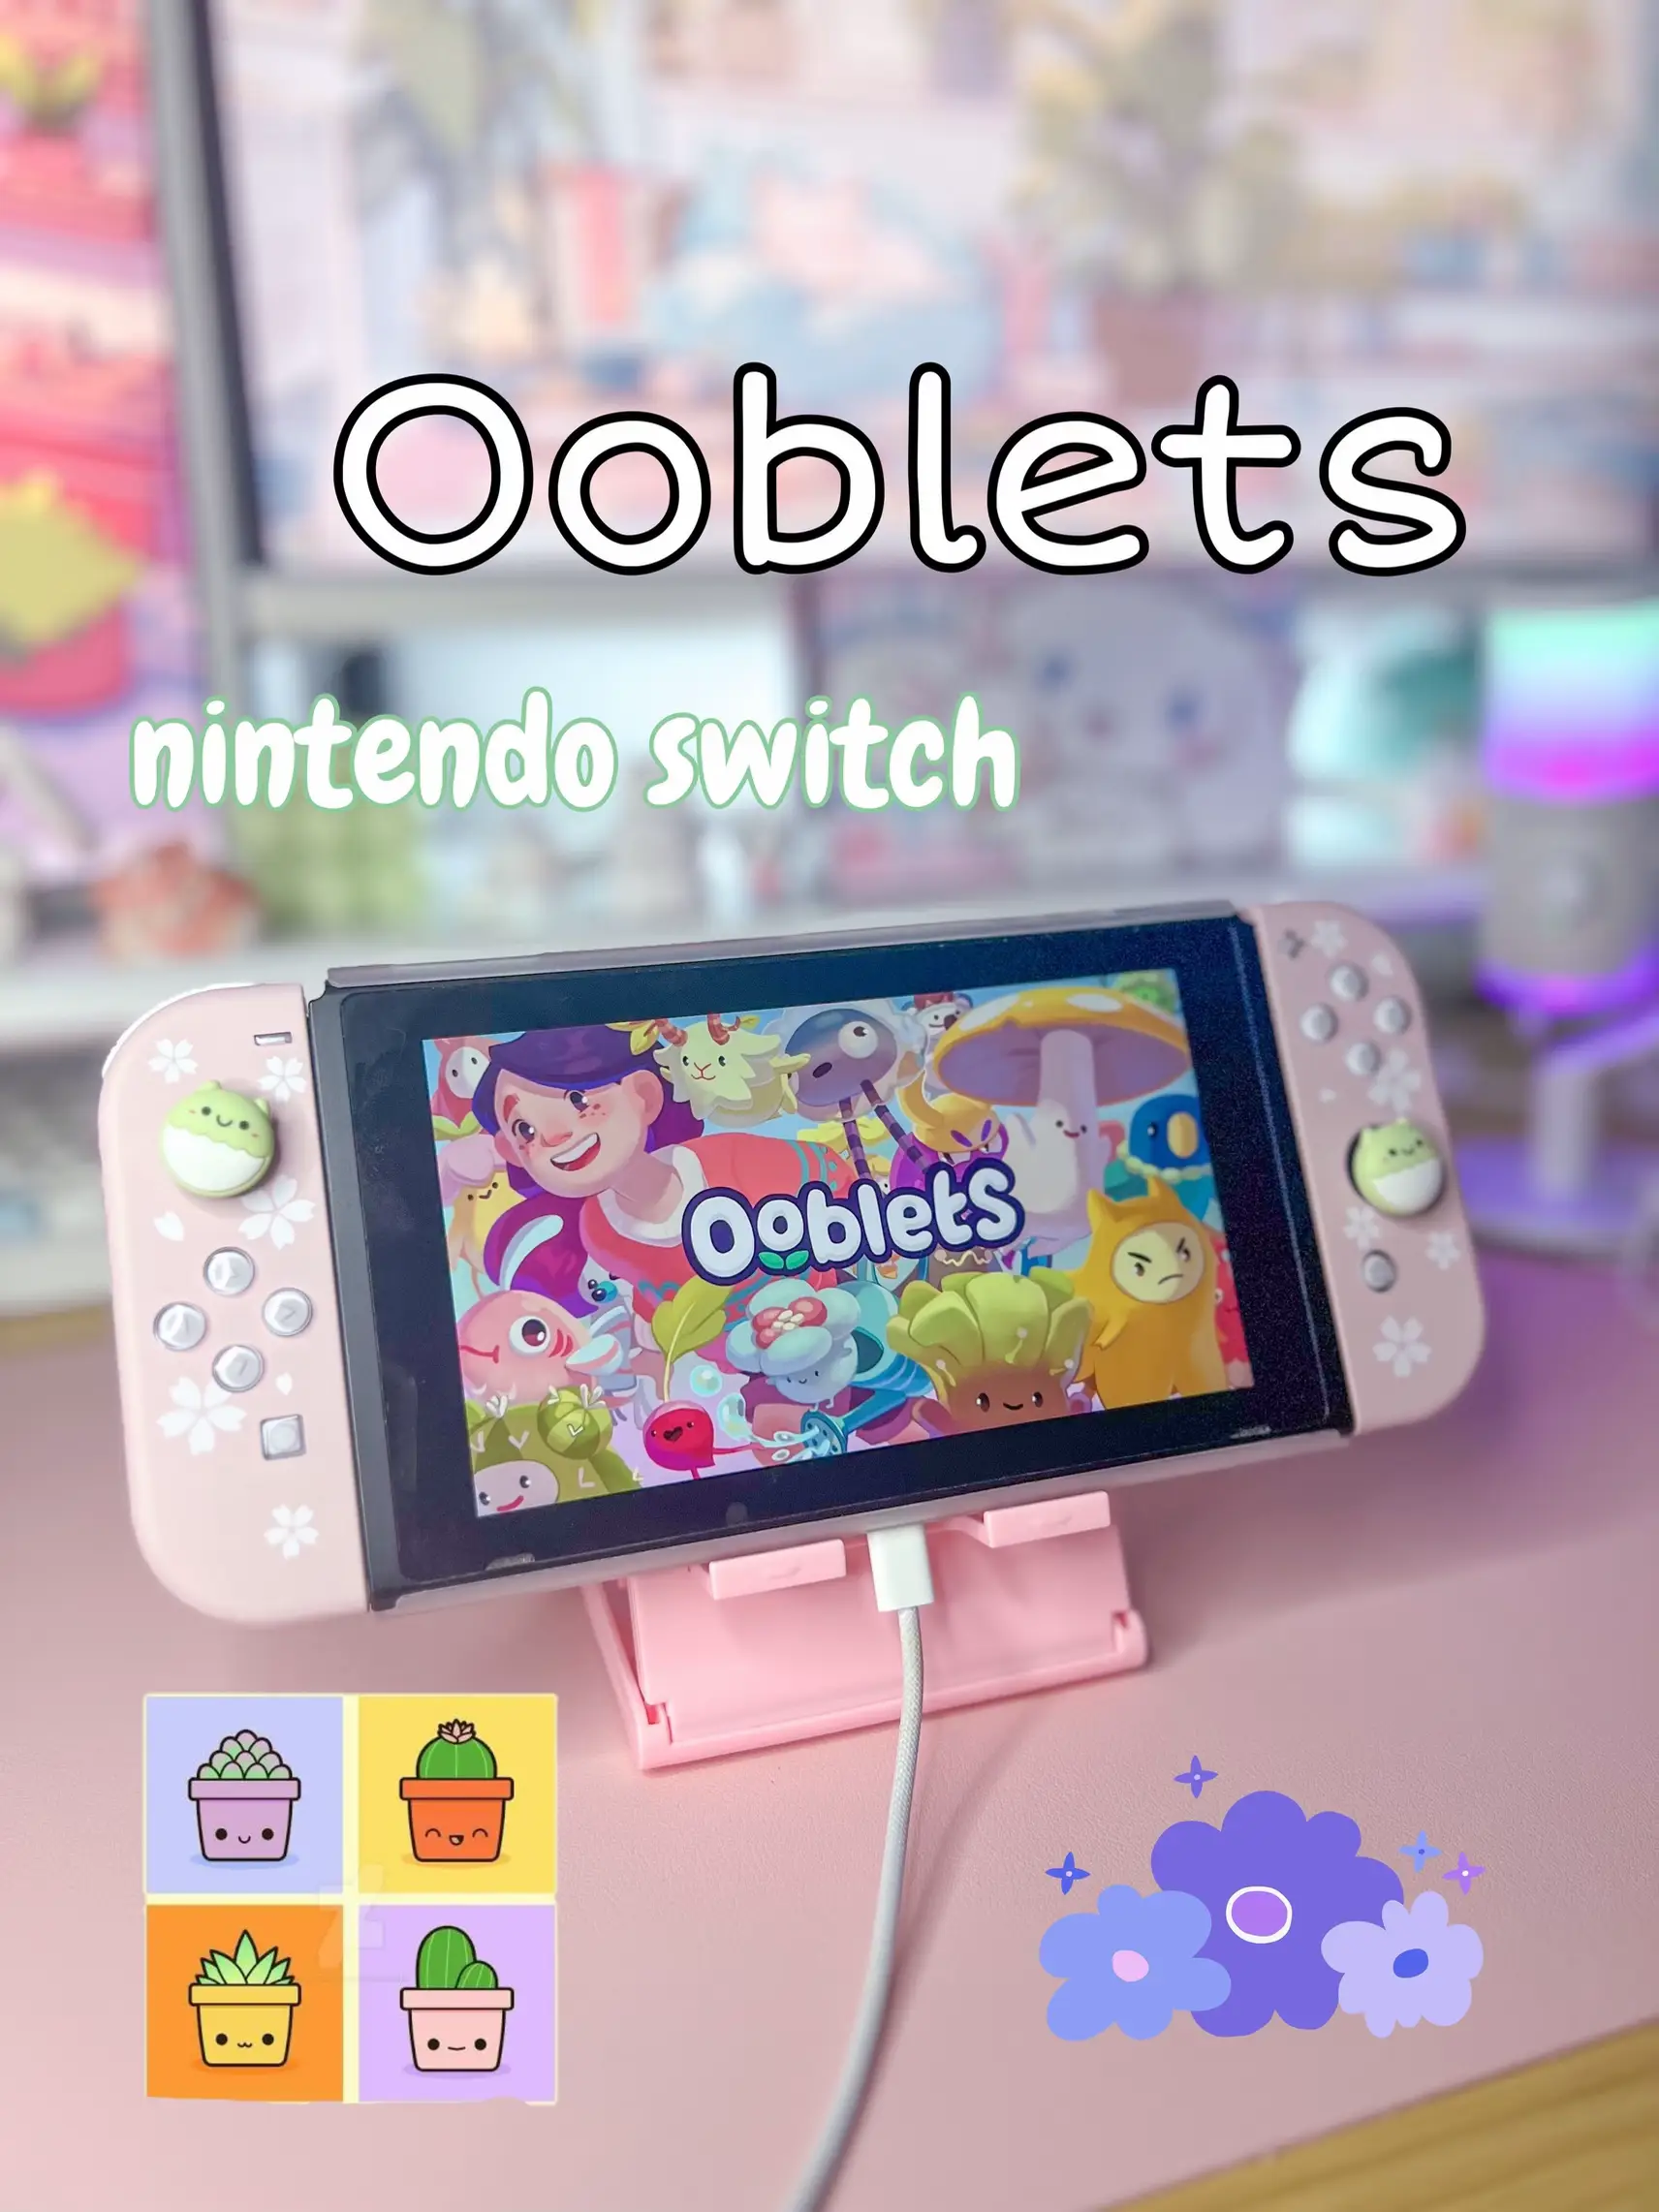 ooblets nintendo switch | Gallery nikki posted | Lemon8 by